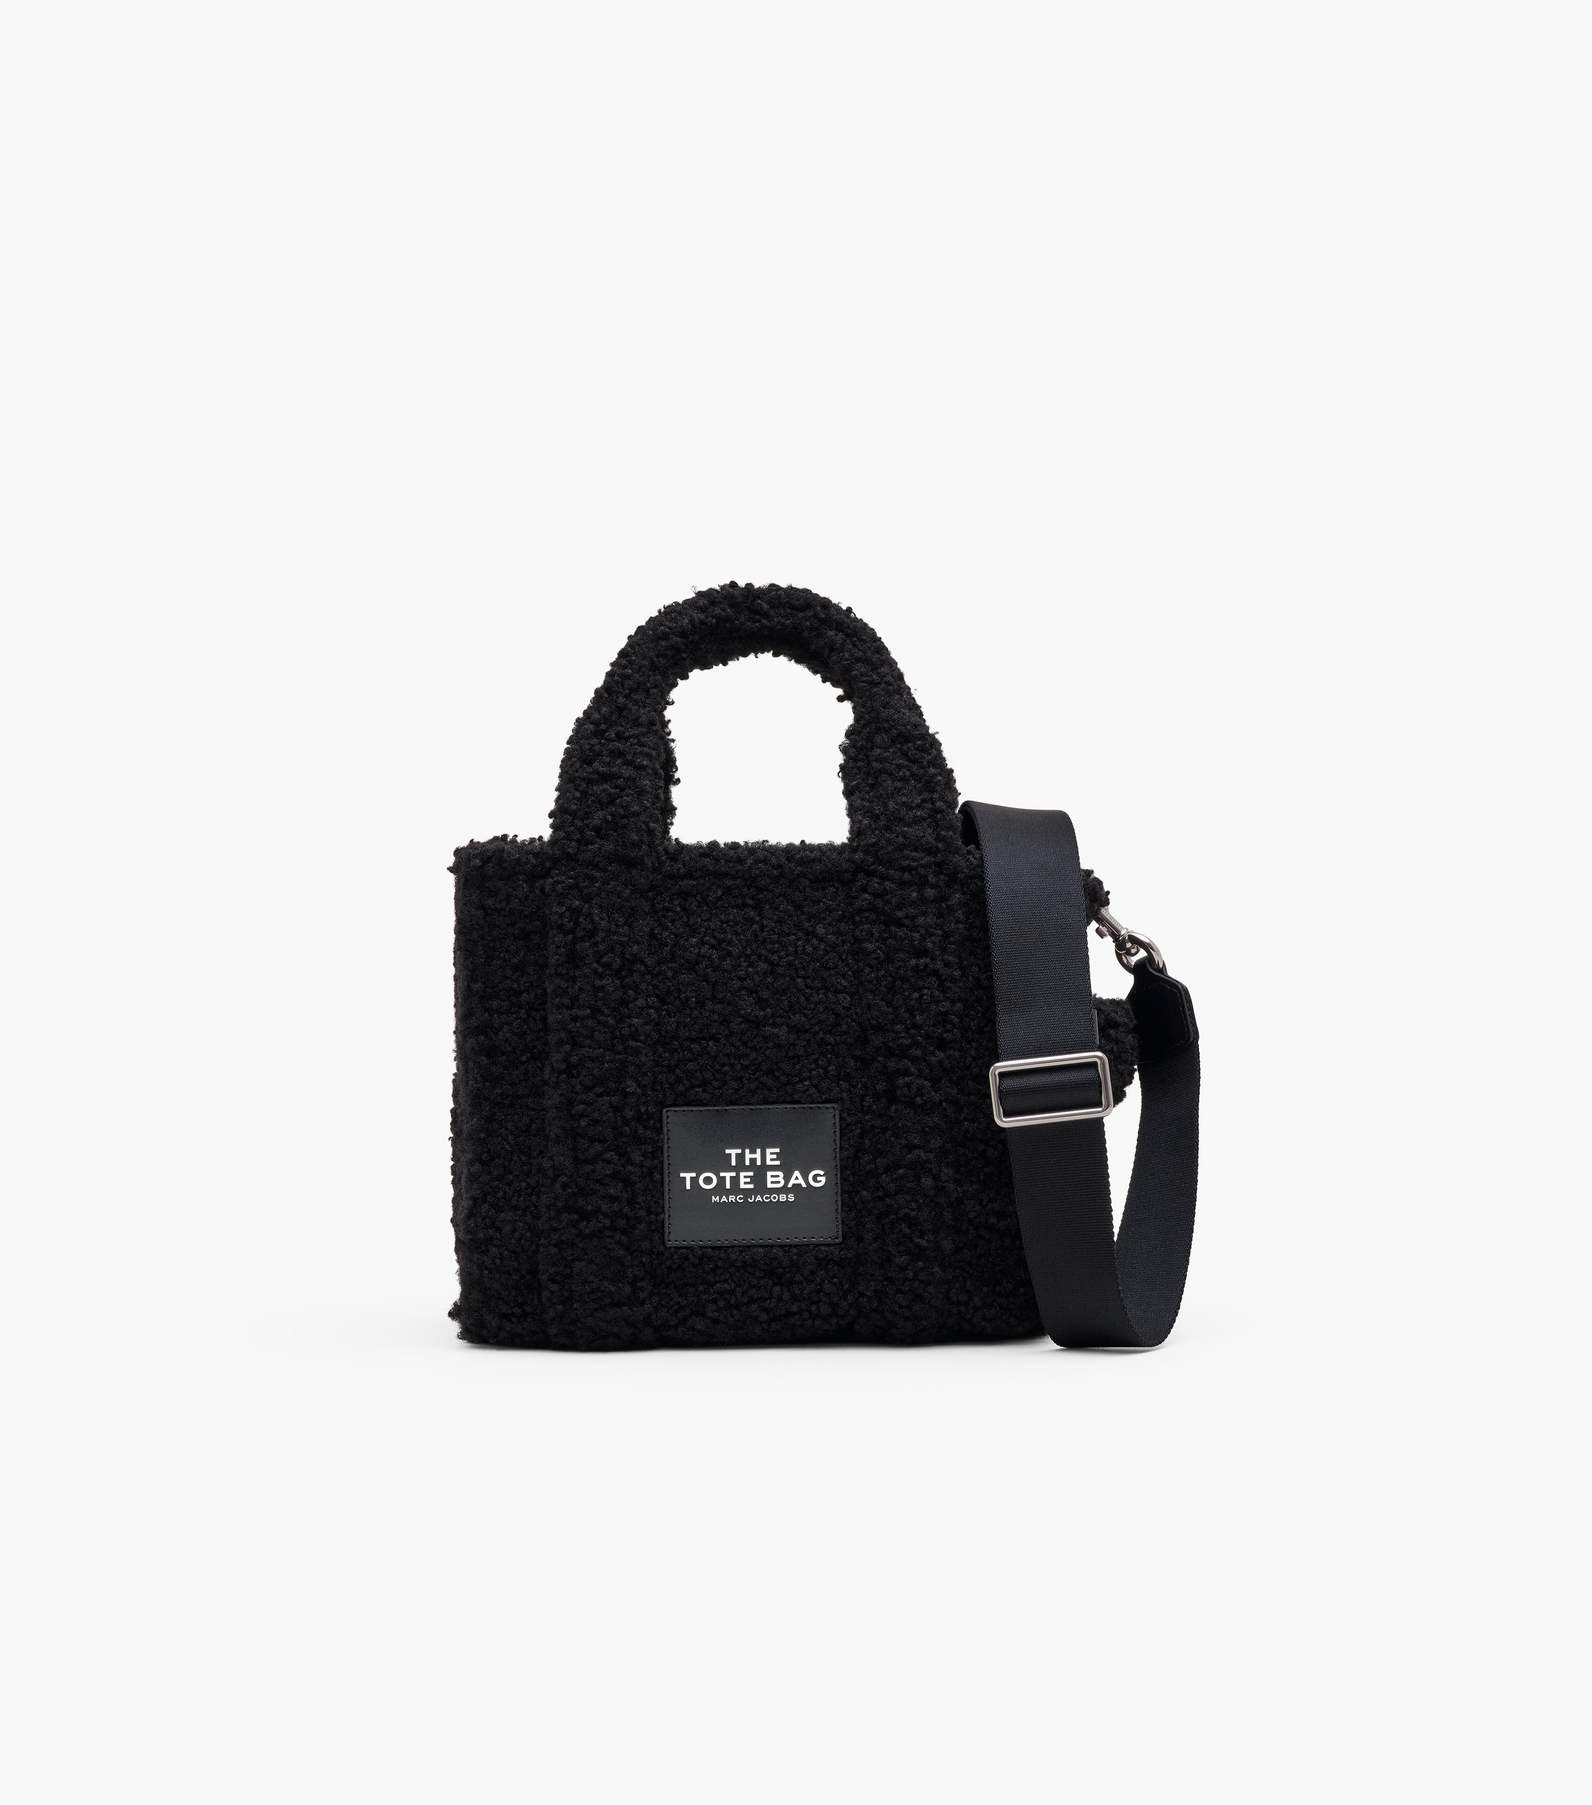 THE TEDDY SMALL TRAVELER TOTE BAG